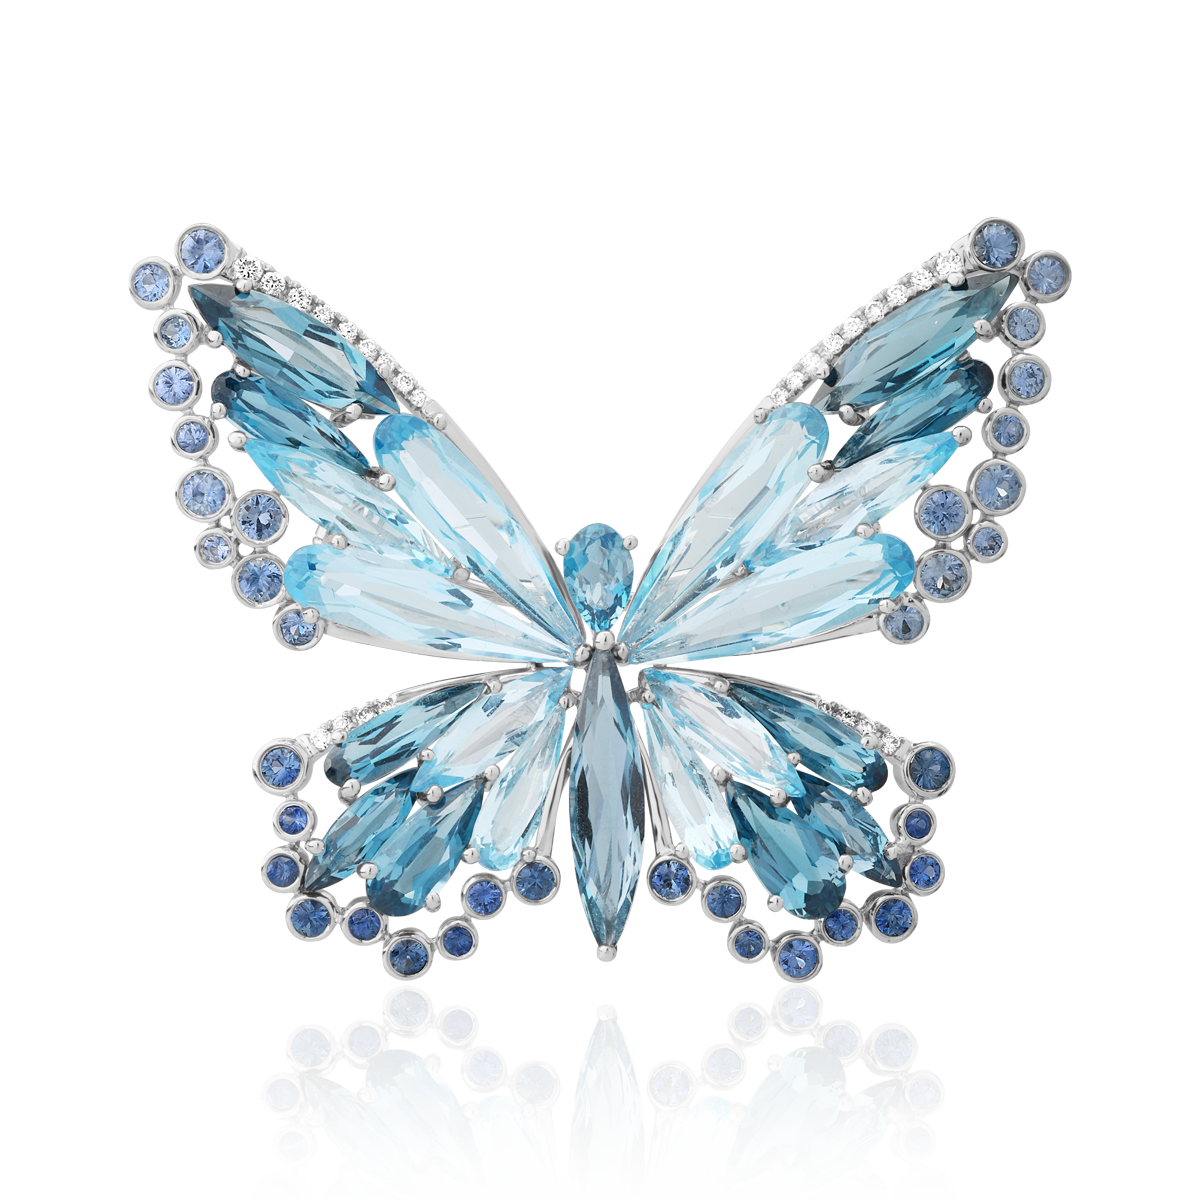 18K white gold brooch with 11.9ct blue topaz and 5.1ct london blue topaz